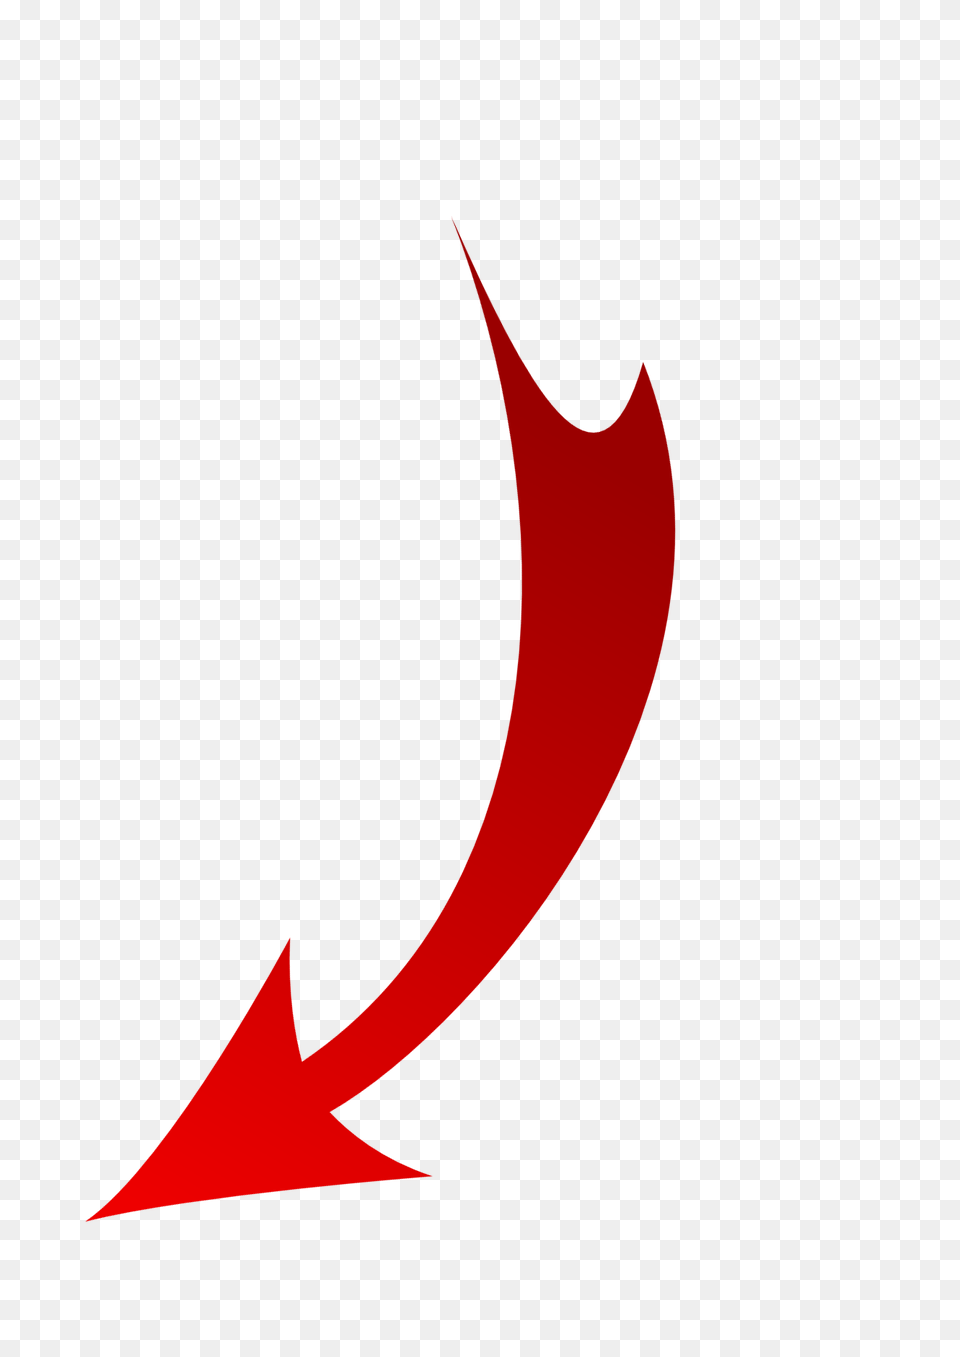 Download 0 Curved Up Arrow Illustration Curved Red Arrow Transparent, Nature, Logo, Outdoors, Night Png